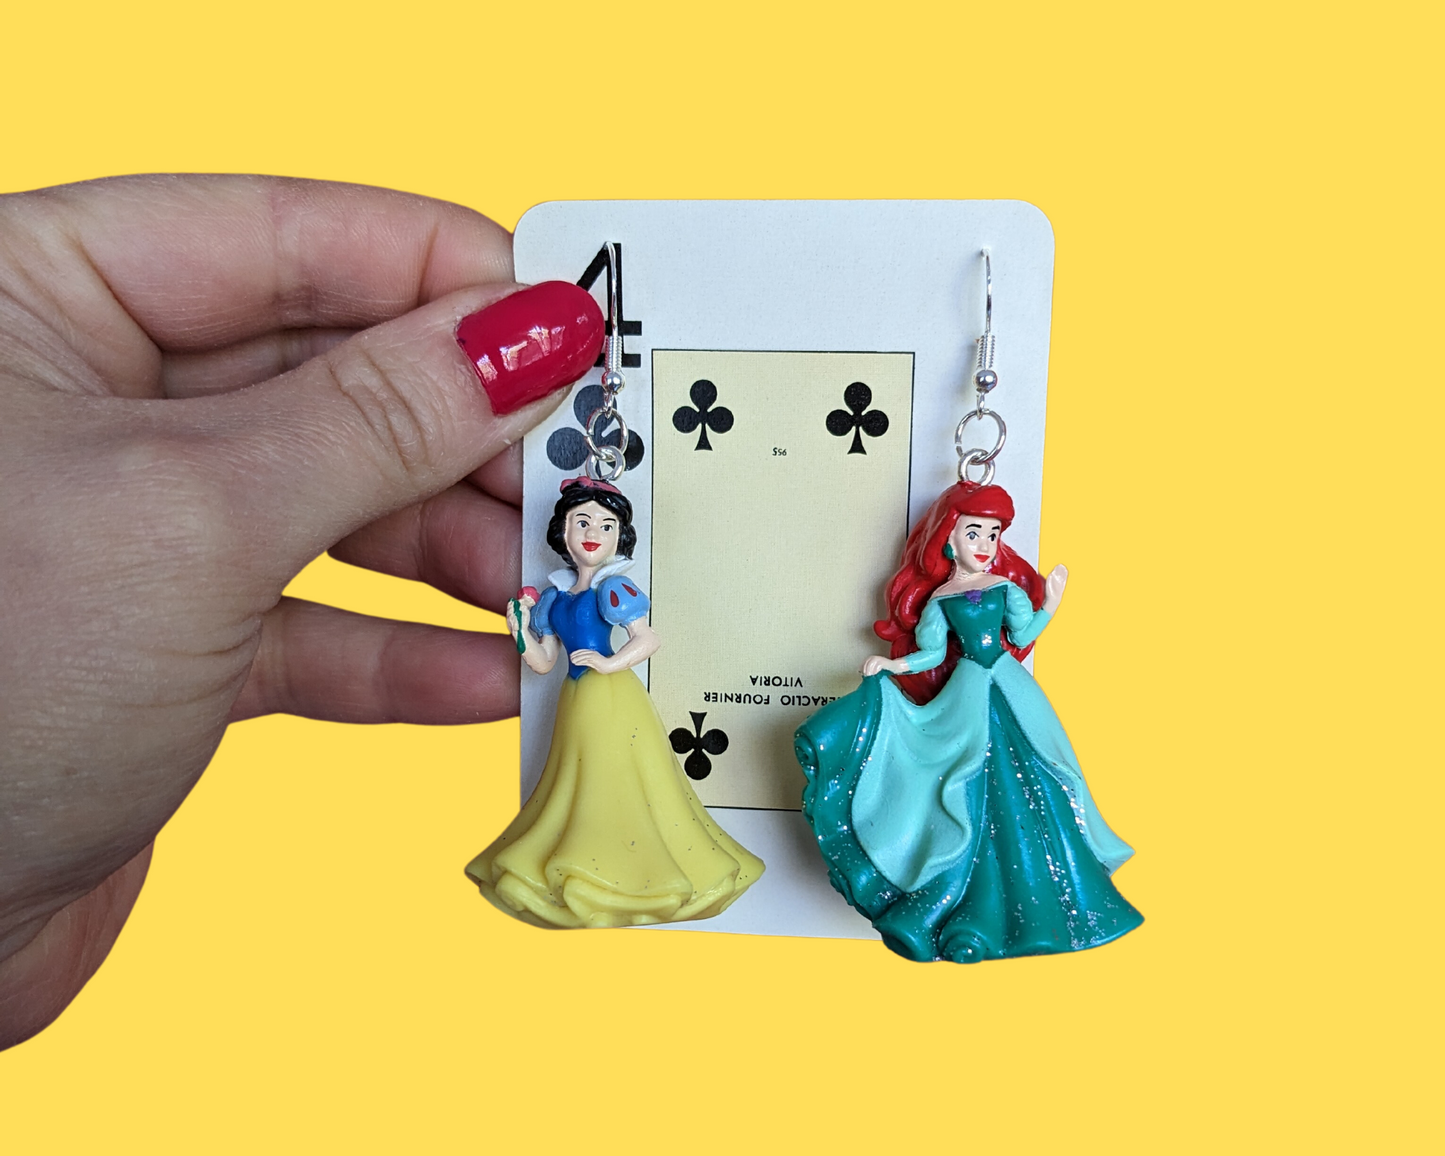 Handmade, Upcycled Disney Snow White and Ariel Earrings